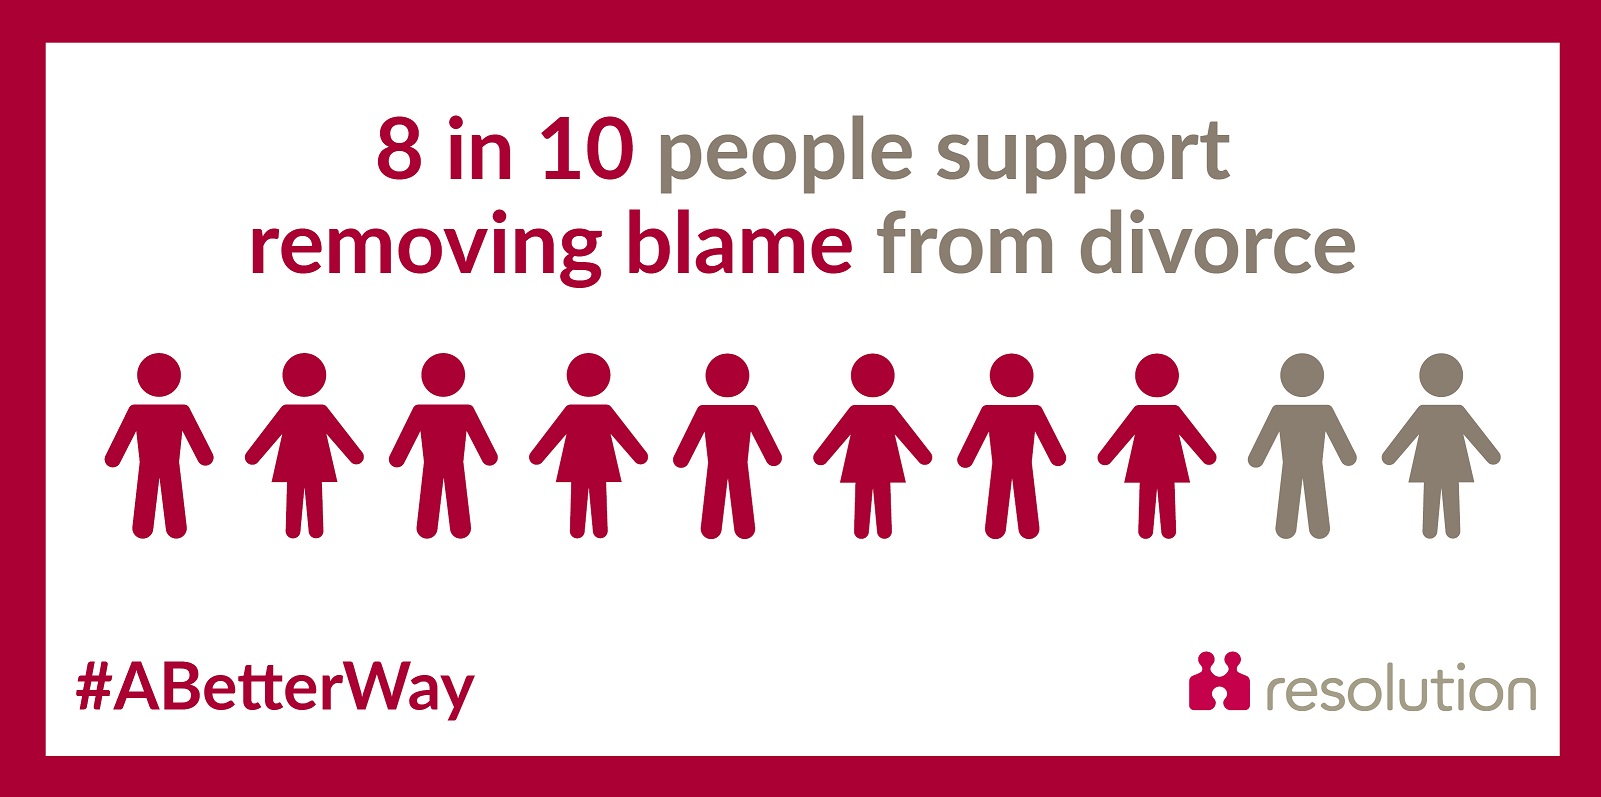 8 in 10 people support removing blame from divorce